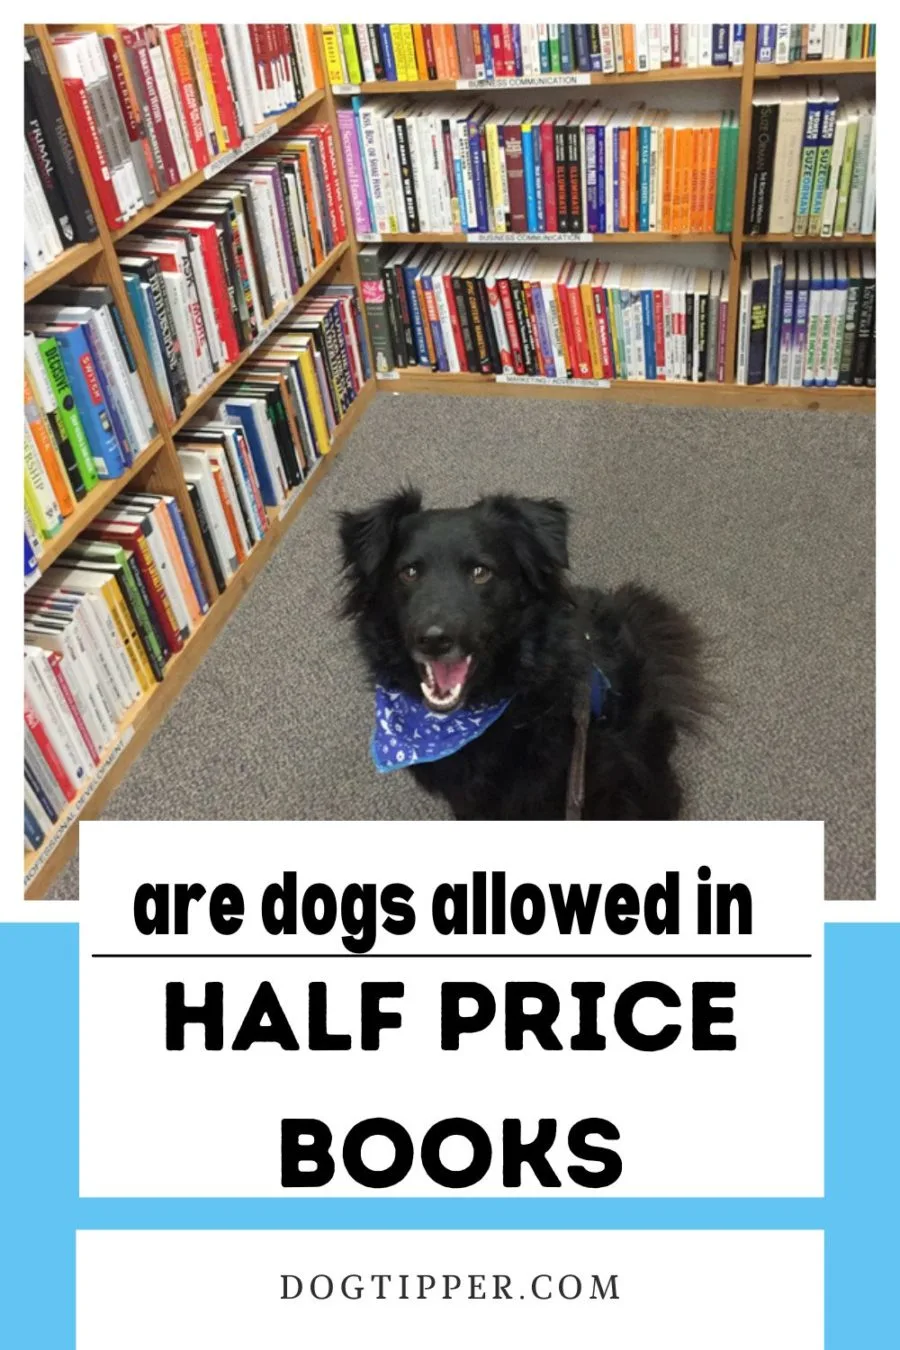 Can dogs go to Half Price Books?